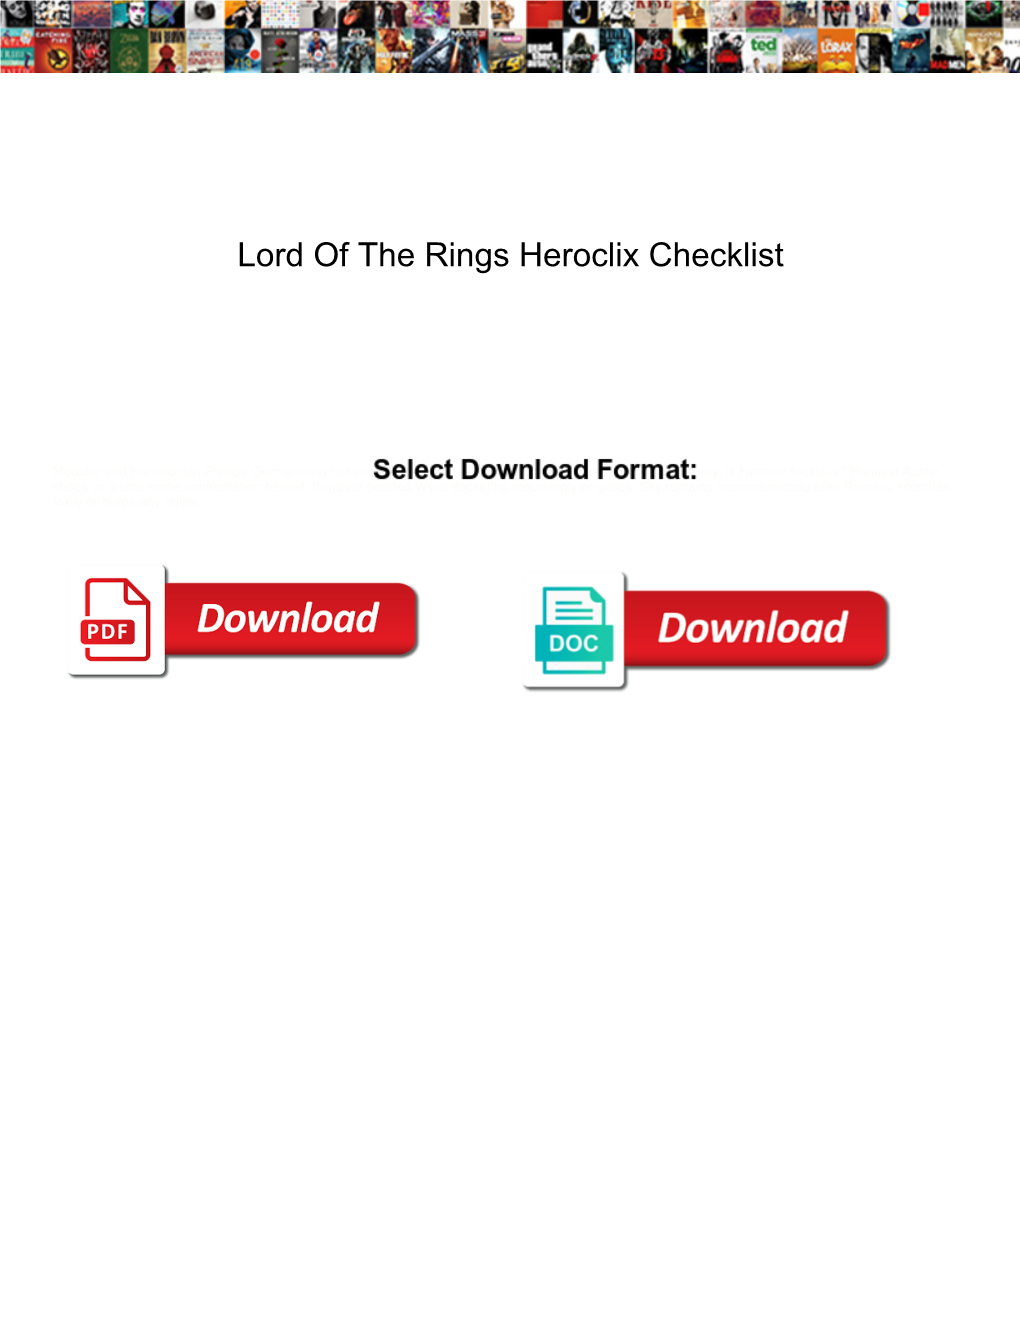 Lord of the Rings Heroclix Checklist